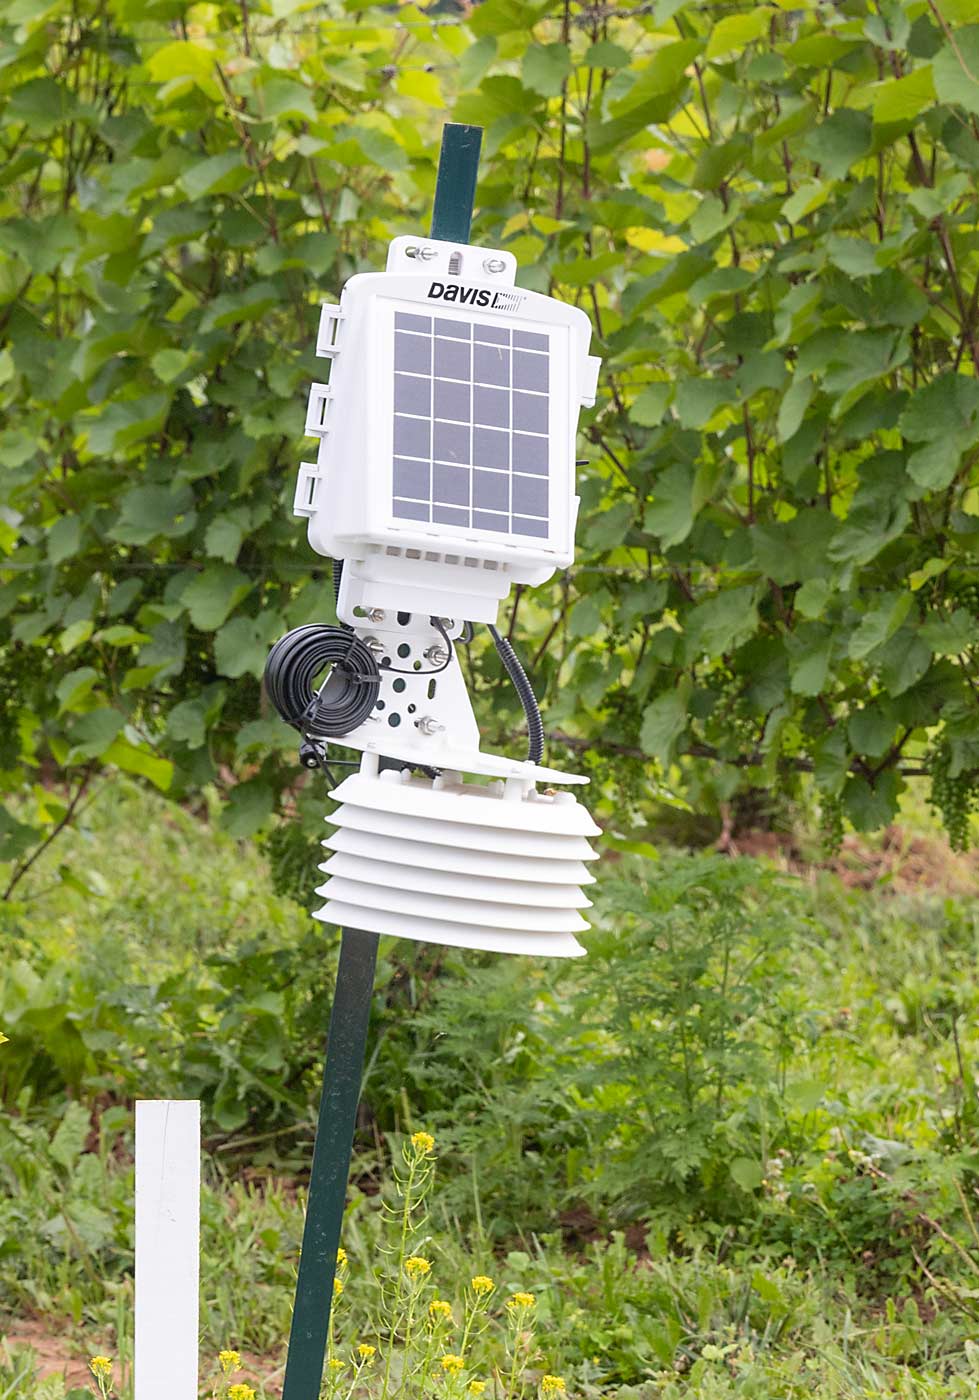 A weather station at Ellslea Farms. Like other fruit-growing regions, Nova Scotia has been grappling with less predictable weather patterns, requiring more tools to adapt. (Matt Milkovich/Good Fruit Grower)